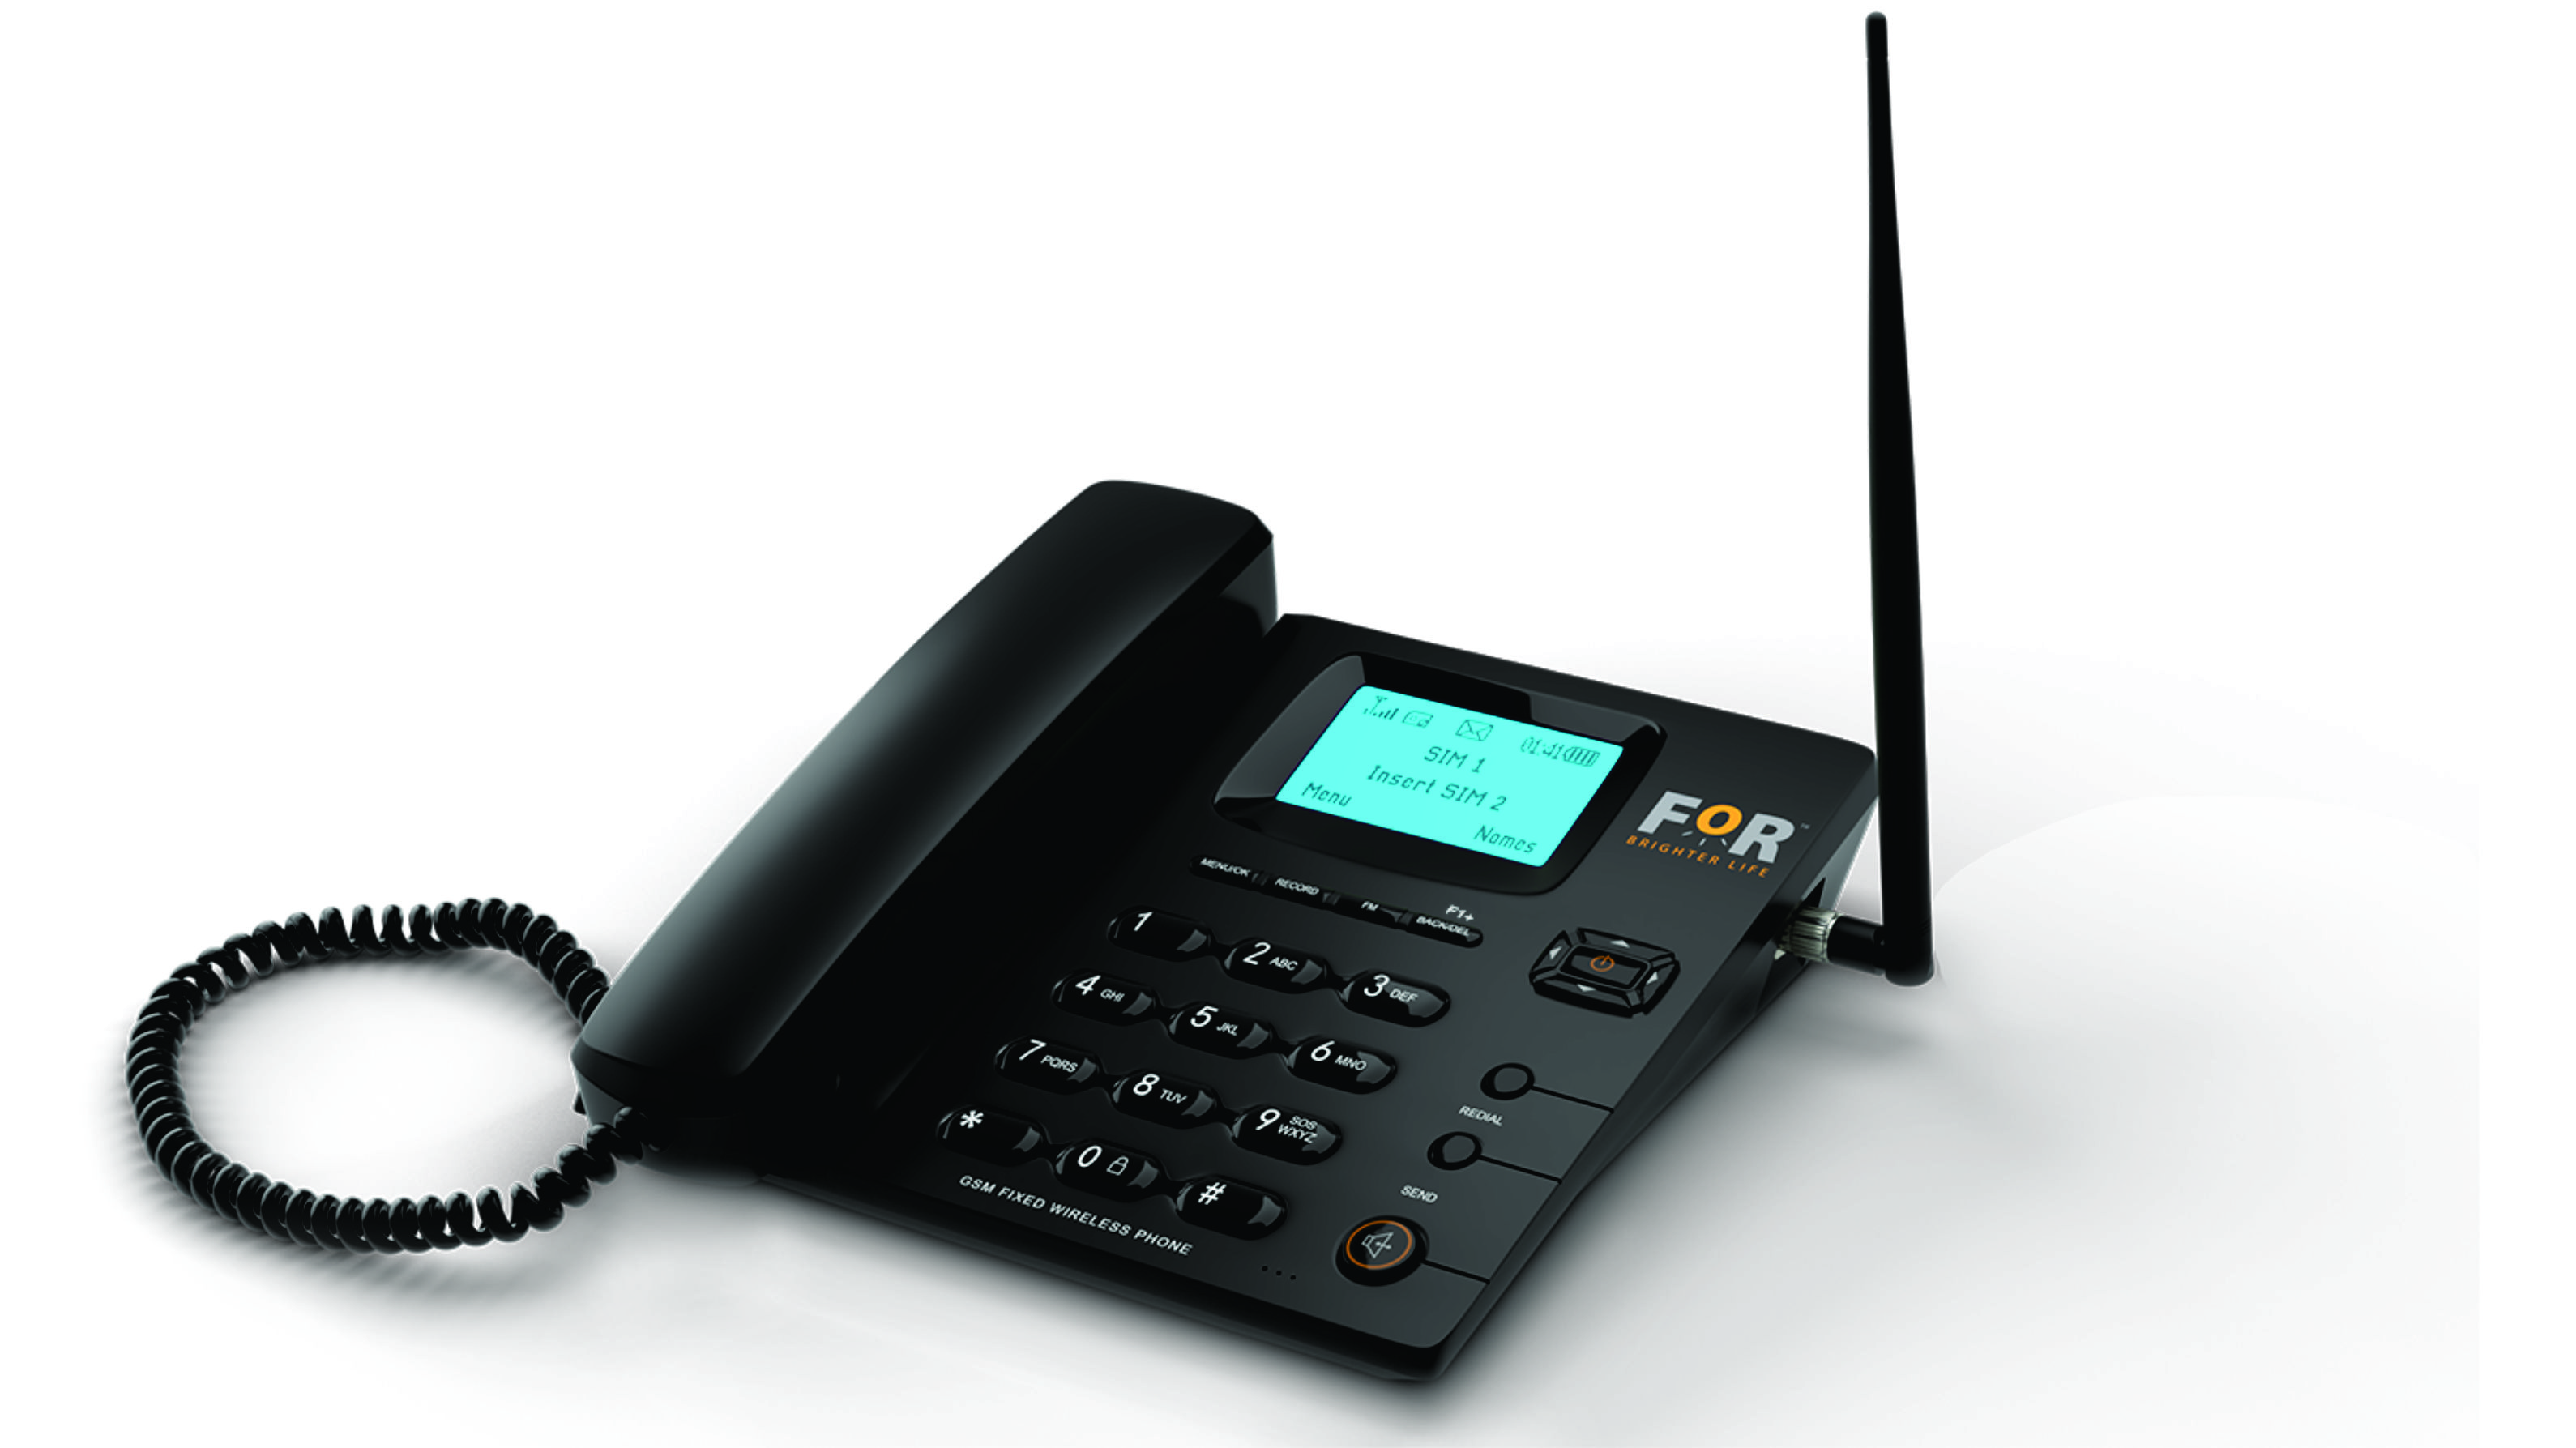 Fortechno | FOR A Brighter Life, BLACK FIXED WIRELESS PHONE Manufacturers